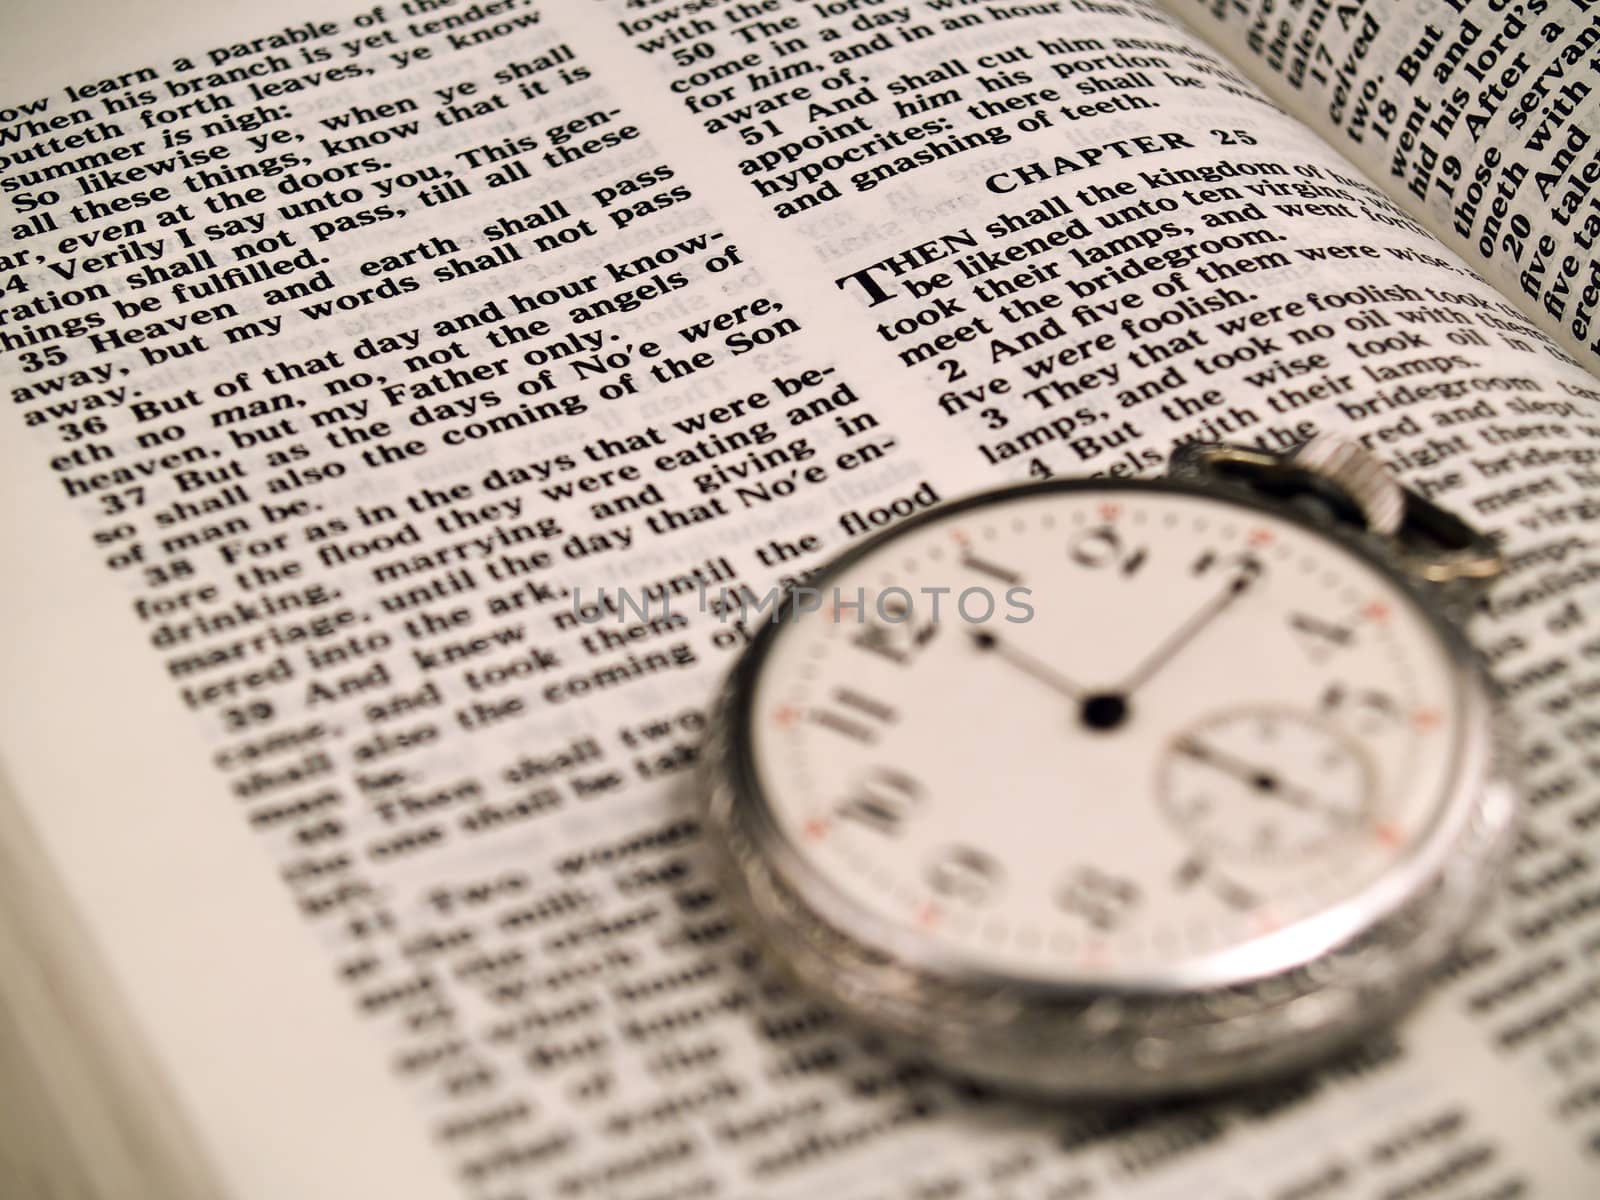 The Bible opened to Matthew 24: 36 with a Pocketwatch - warm color tone  "No man knows the day or hour"